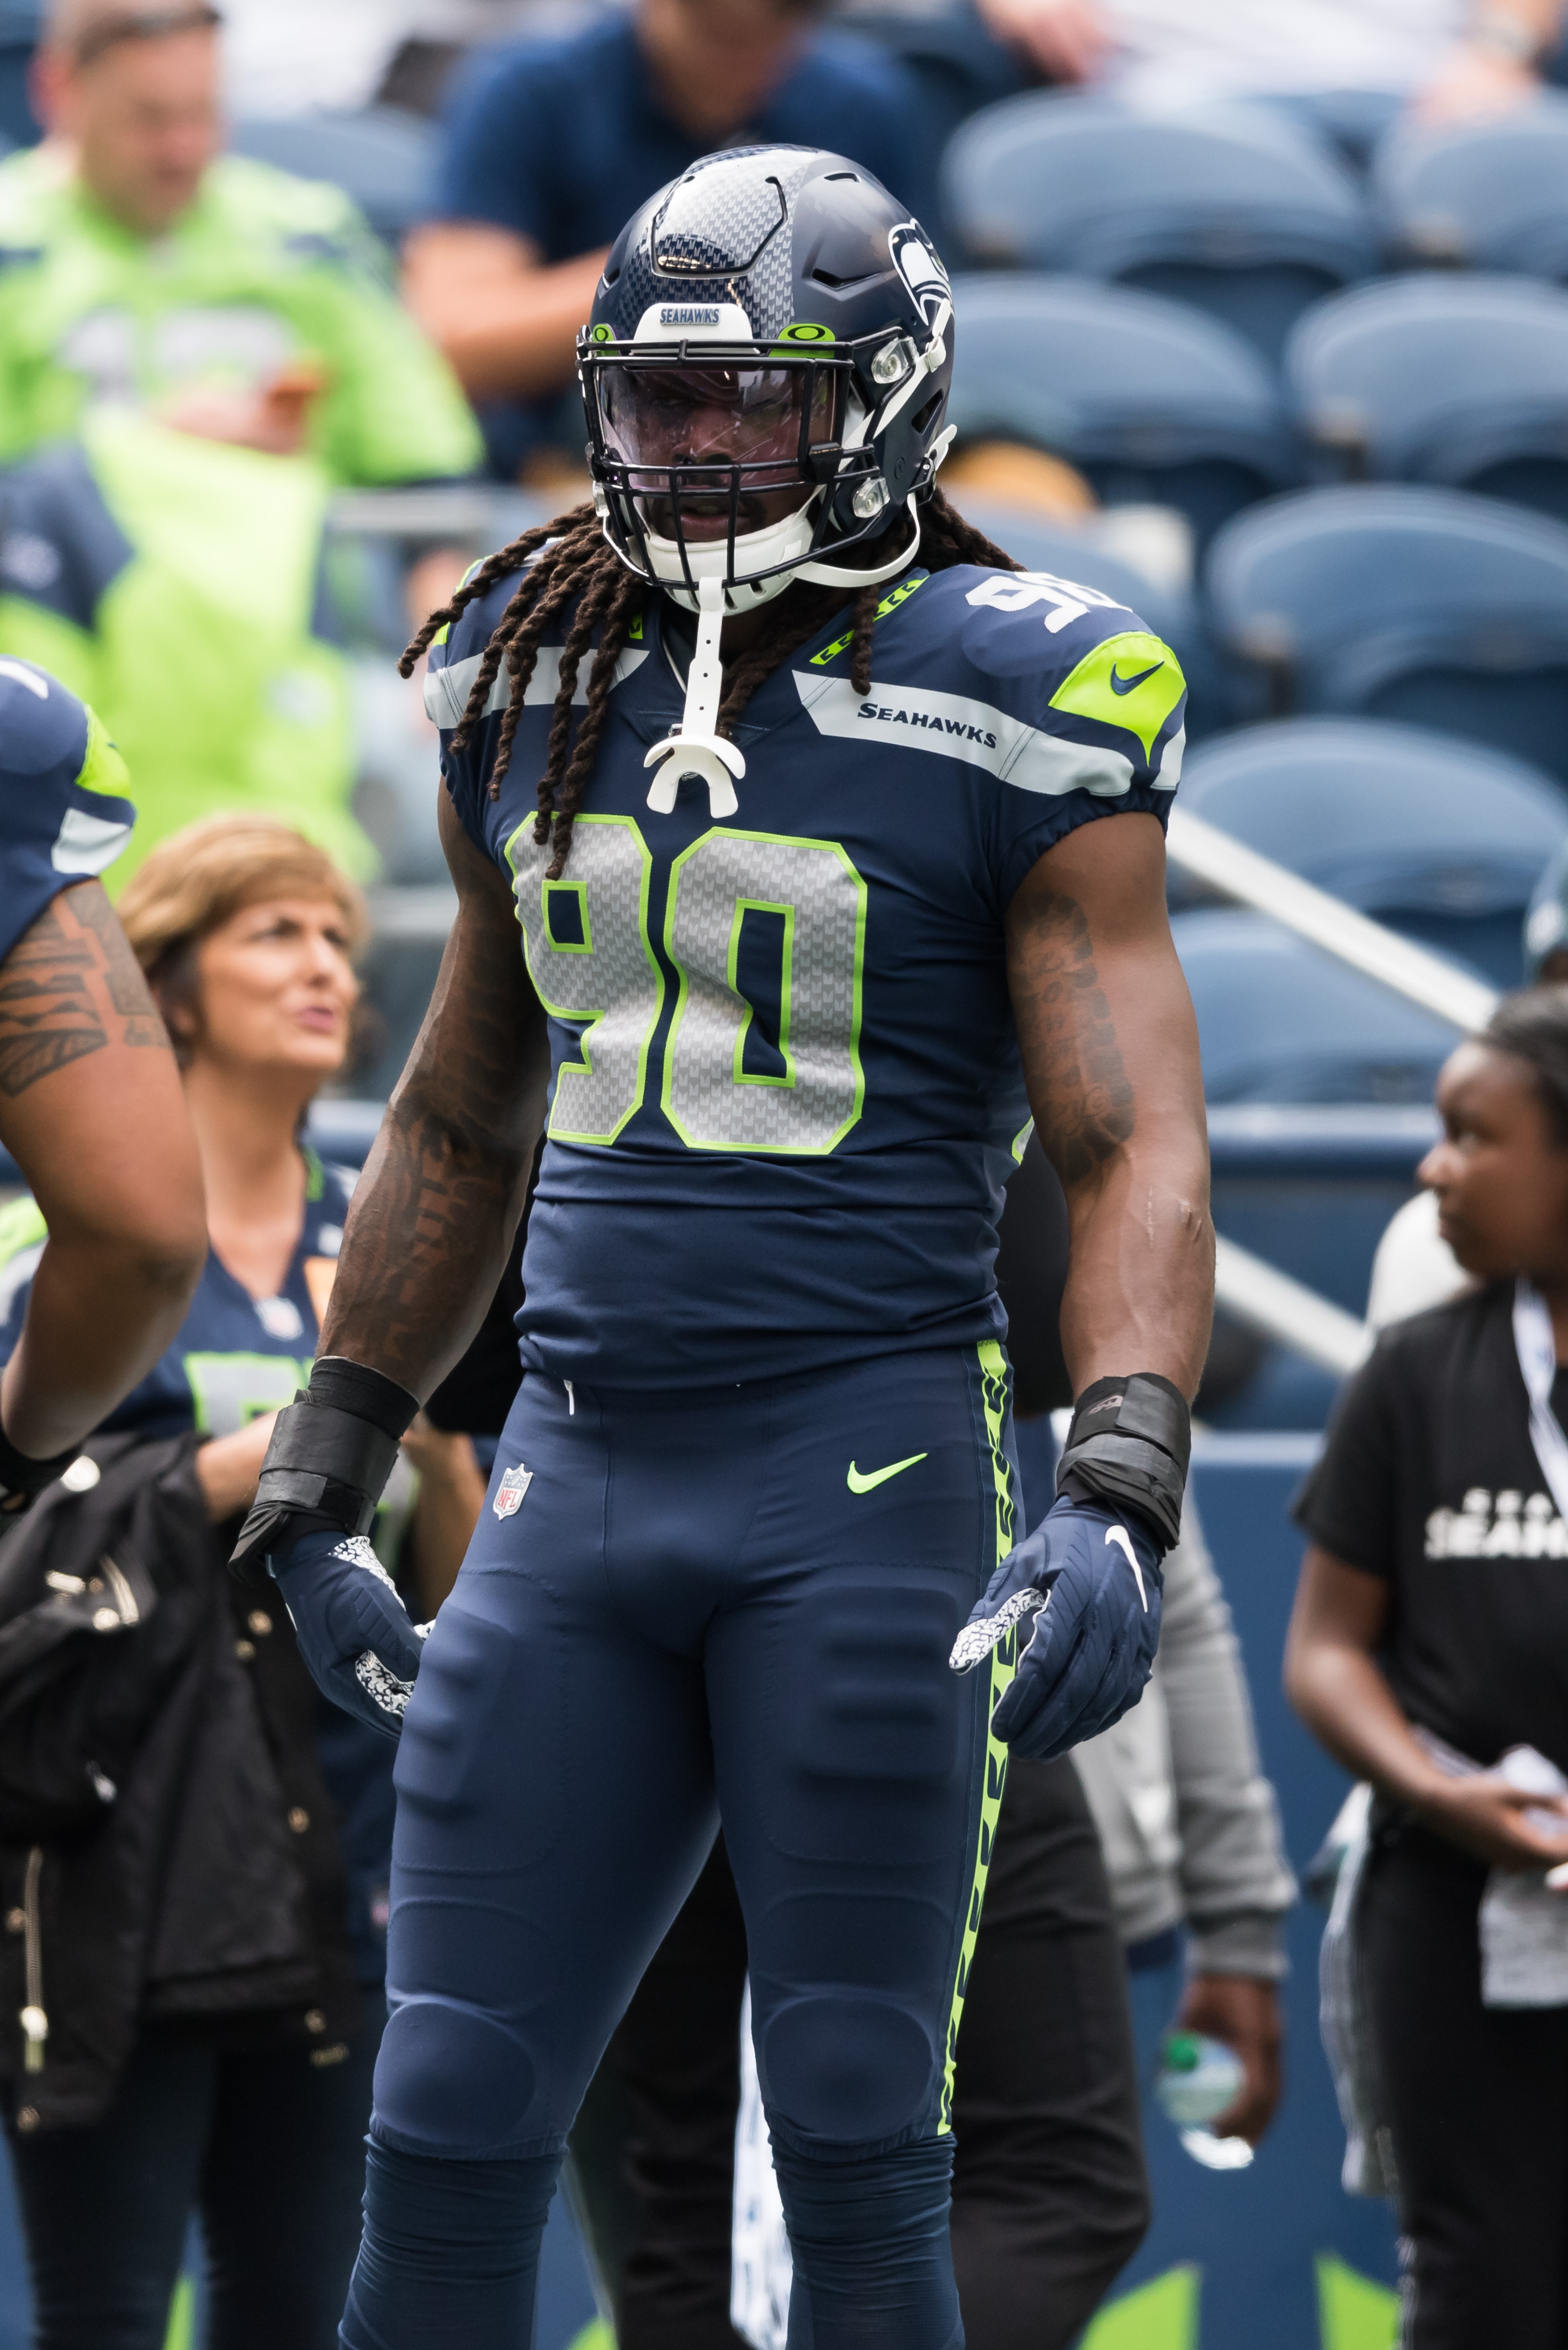 Jadeveon Clowney Abn7fzggudr6nm Take a look back at some of the